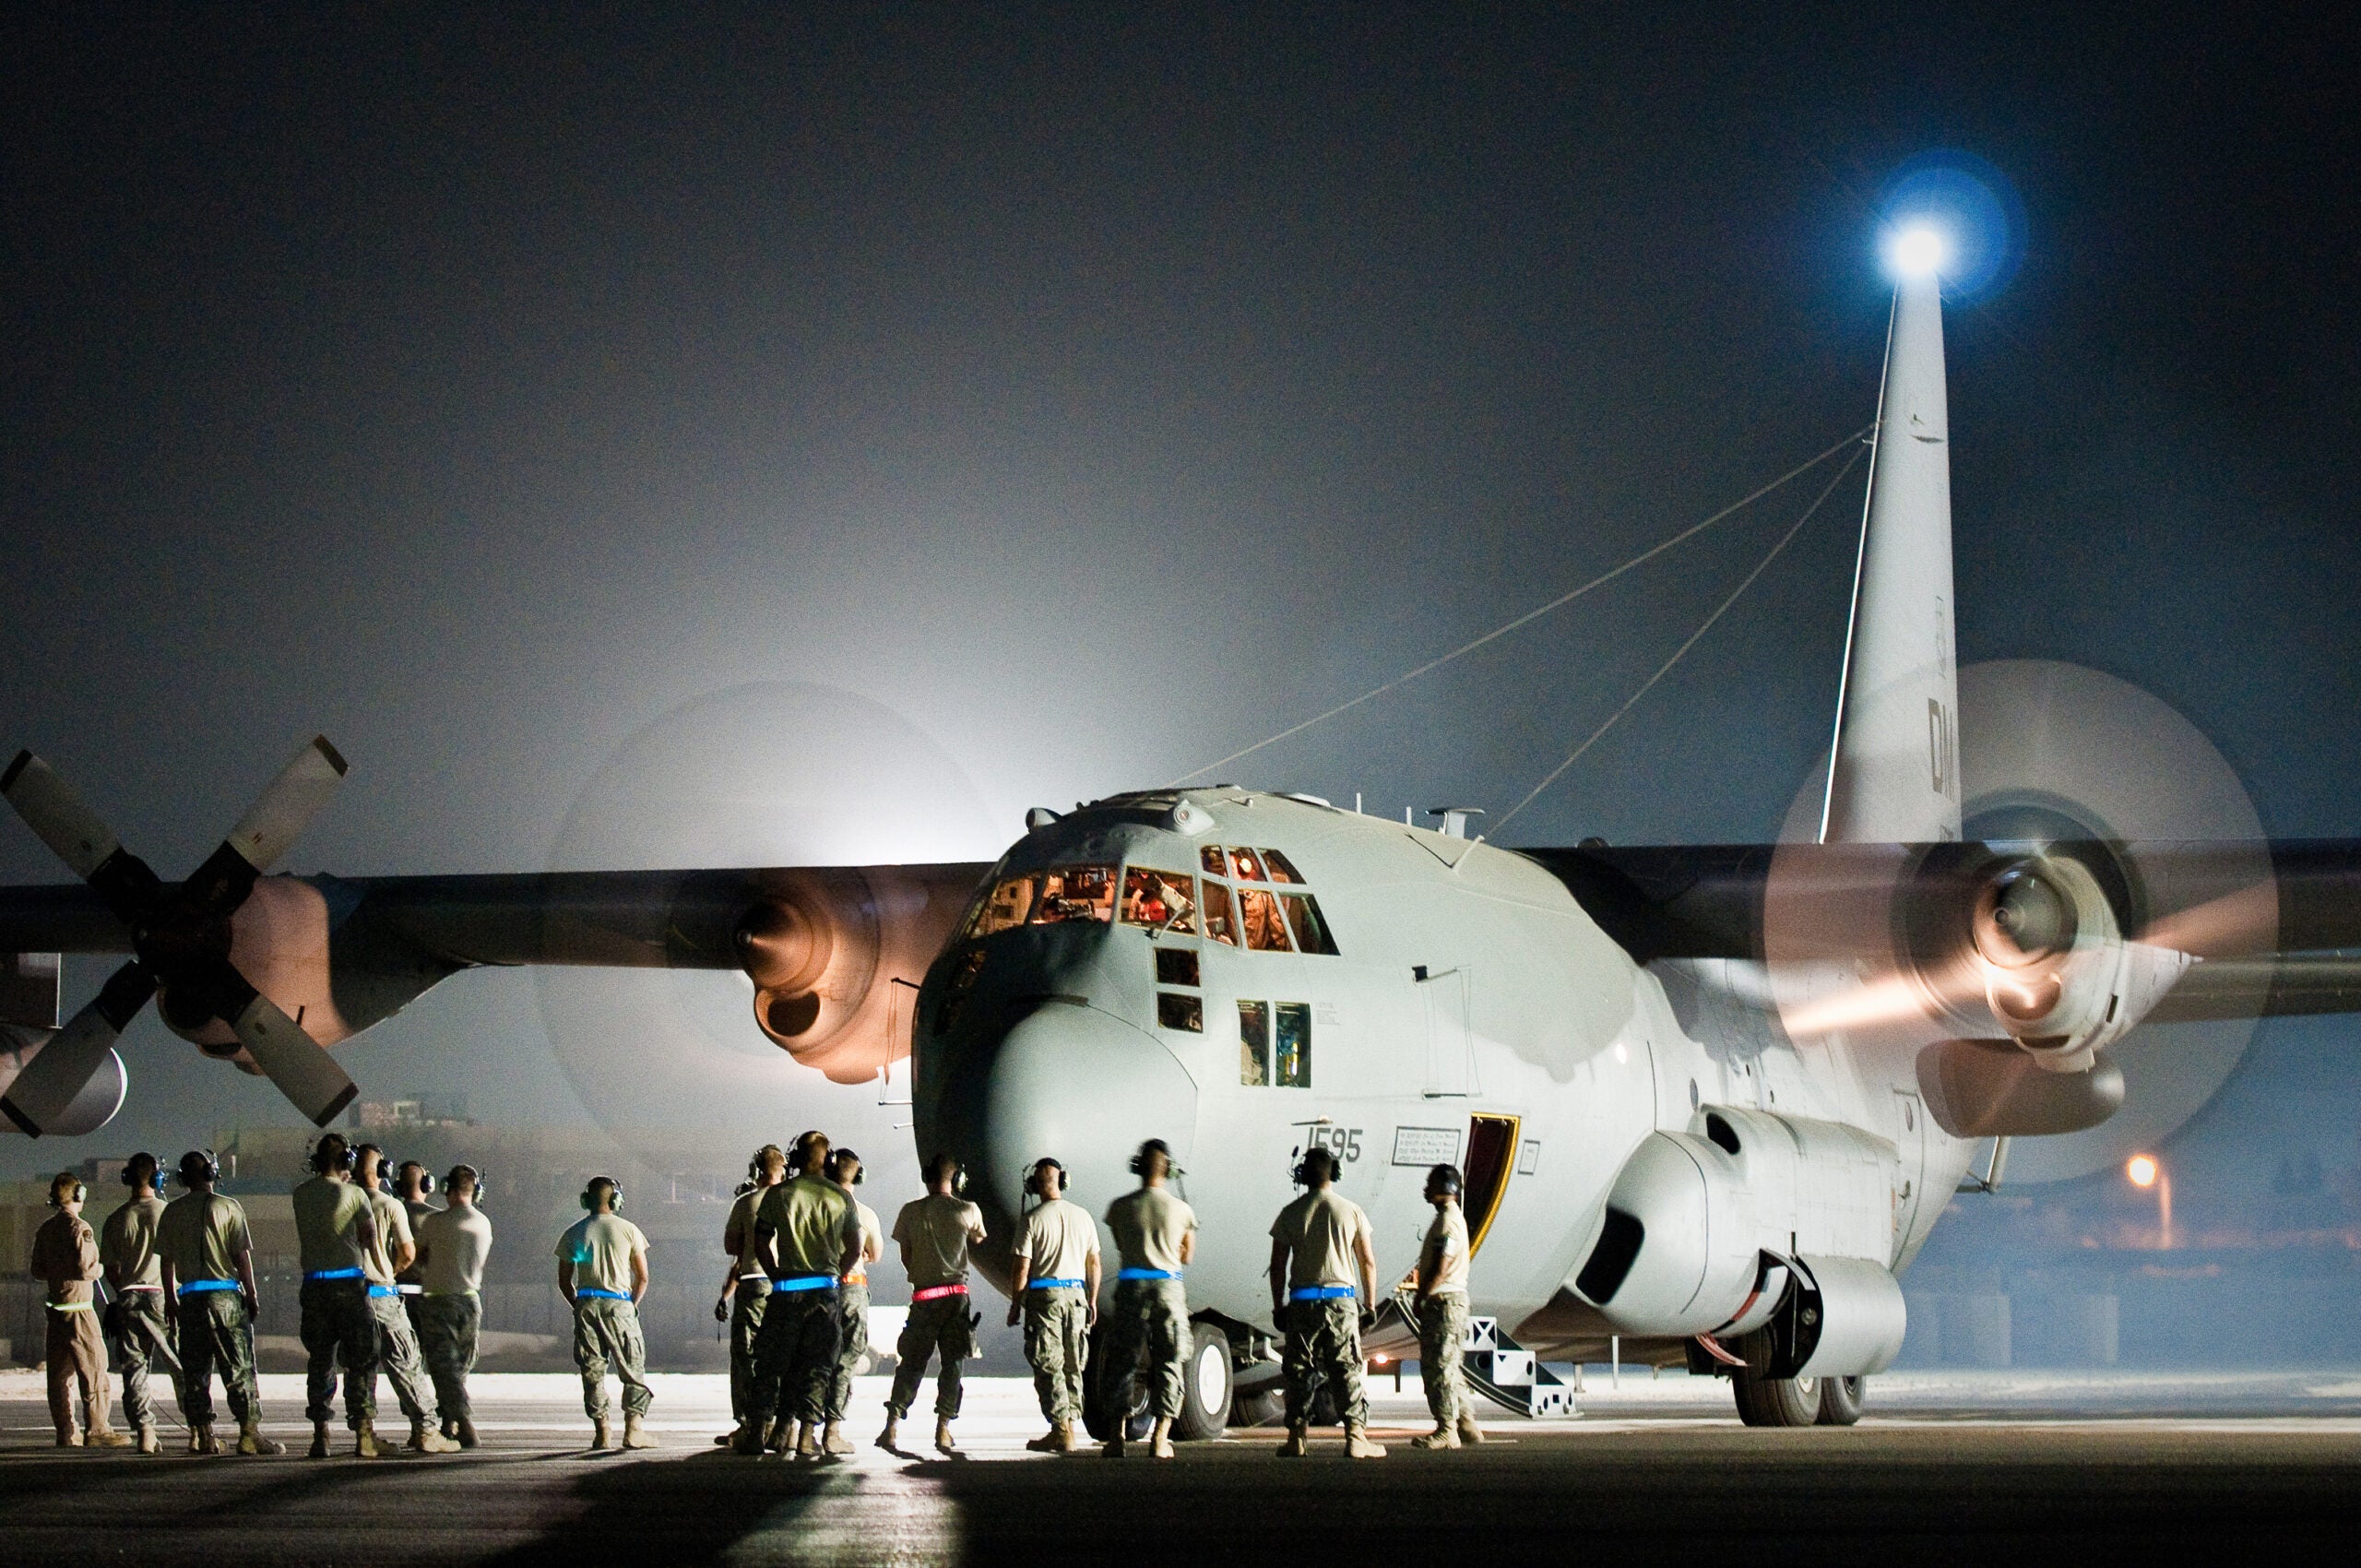 Maintenance troops and aircrew members prepate a U.S. Air Force EC-130H aircraft for its final departure from an undisclosed air base here Aug. 29, 2010. The plane's unit, the 43rd Expeditionary Electronic Combat Sqaudron, has been part of the 386th Air Expeditionary Wing for six and a half years but is moving to another base in the U.S. Central Command area of responsibility becuase of the responsible drawdown of forces in Iraq. The EC-130H Compass Call aircraft provides U.S. forces with the ability to jam enemy communications.